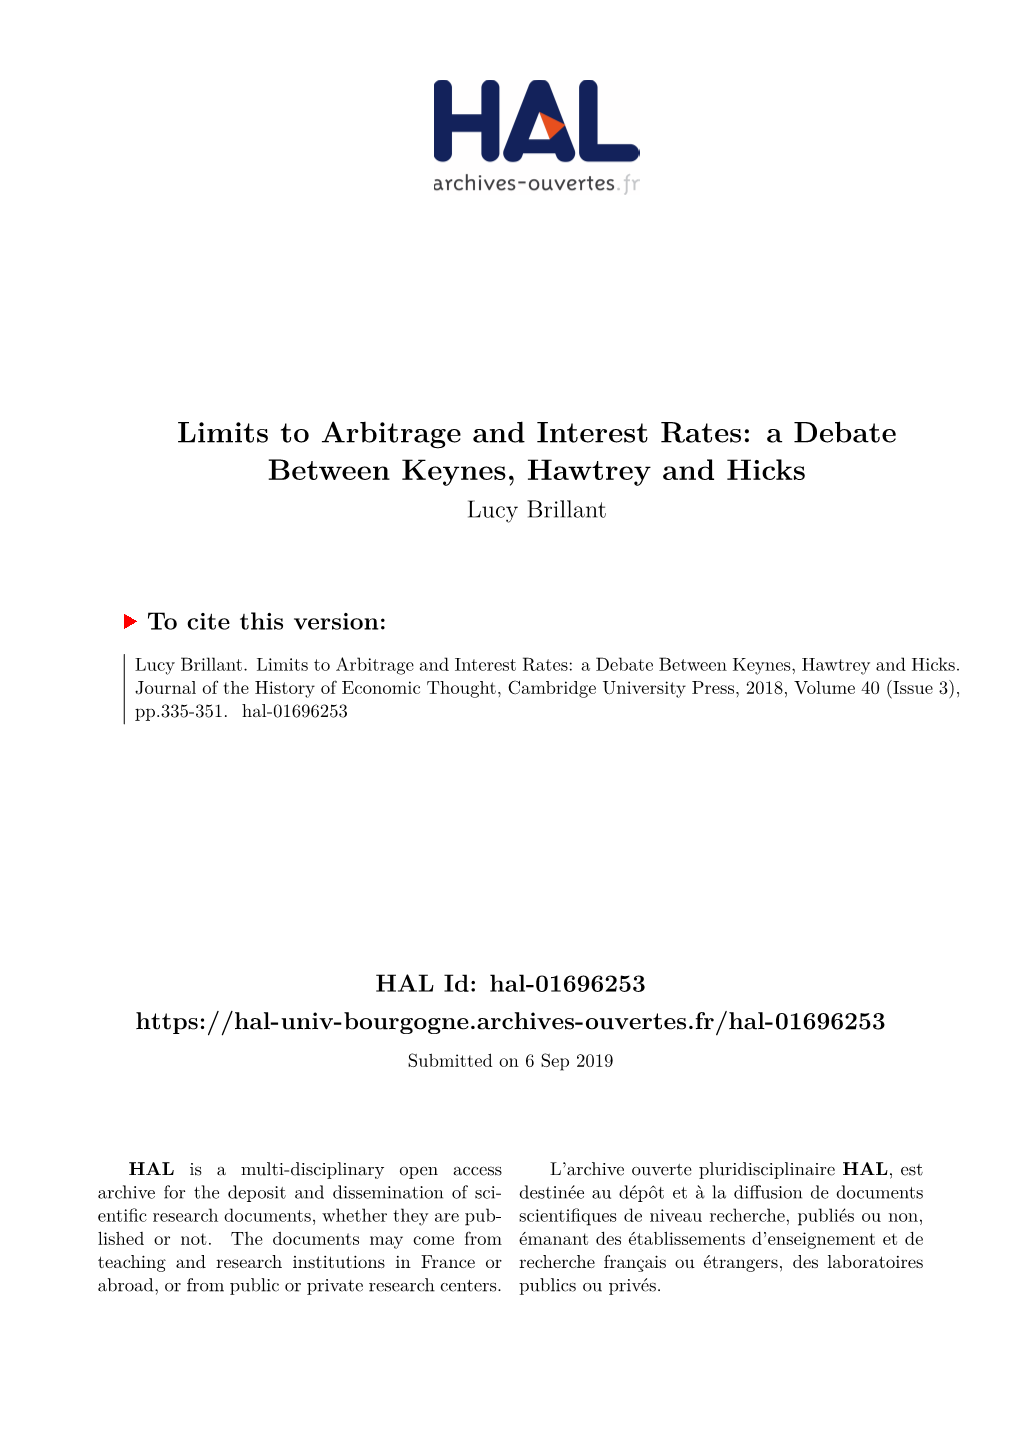 Limits to Arbitrage and Interest Rates: a Debate Between Keynes, Hawtrey and Hicks Lucy Brillant